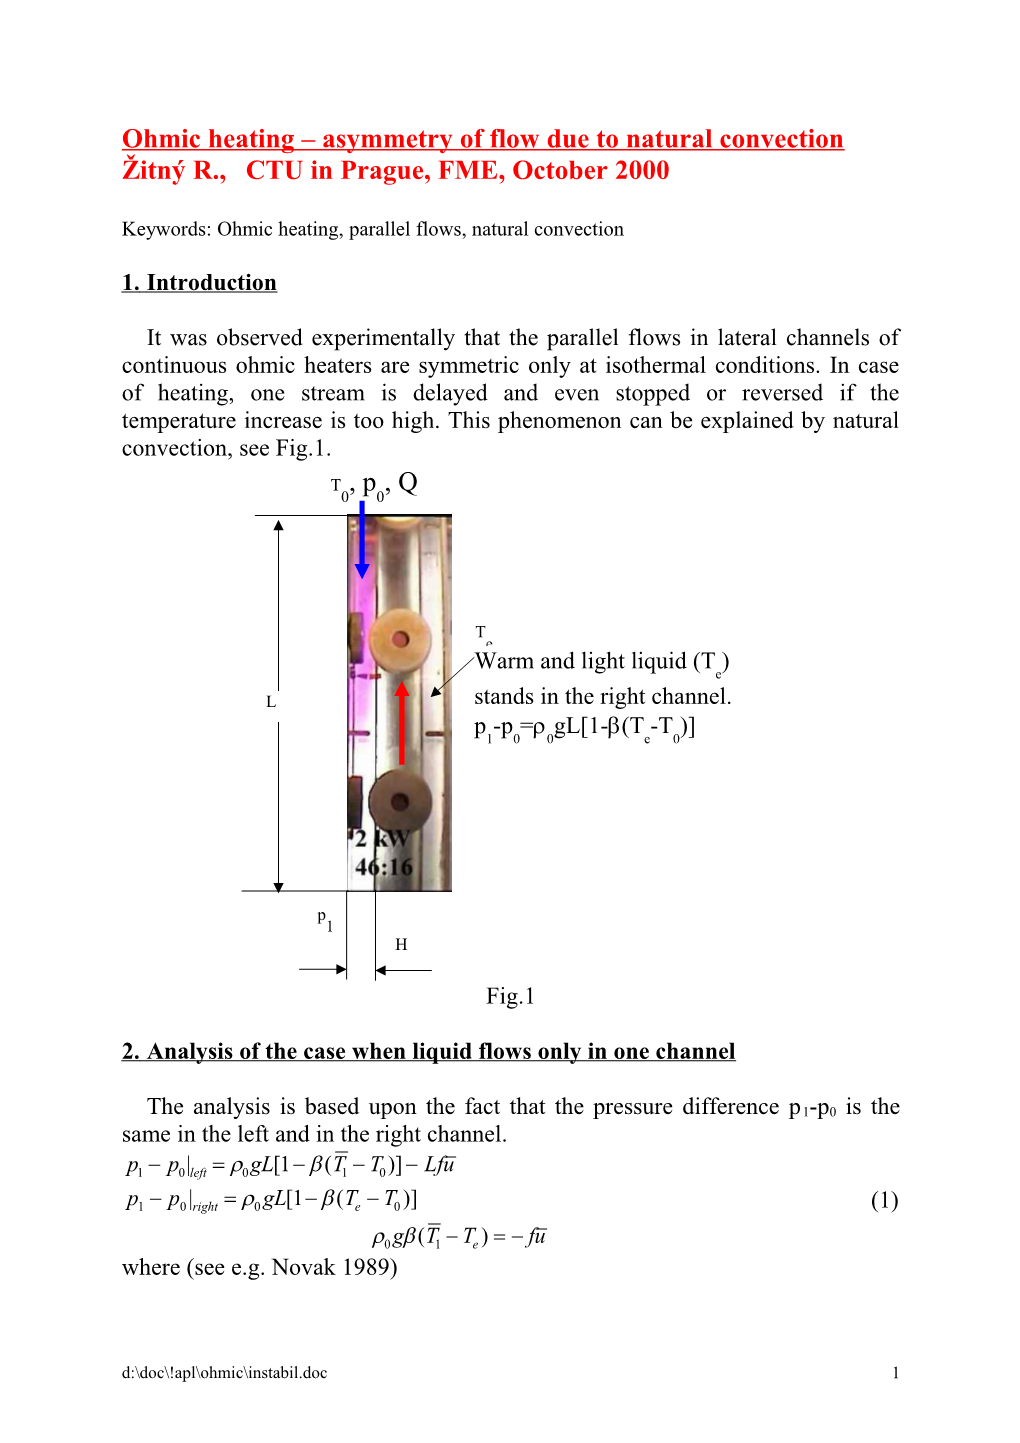 Ohmic Heating Asymmetry of Flow Due to Natural Convection